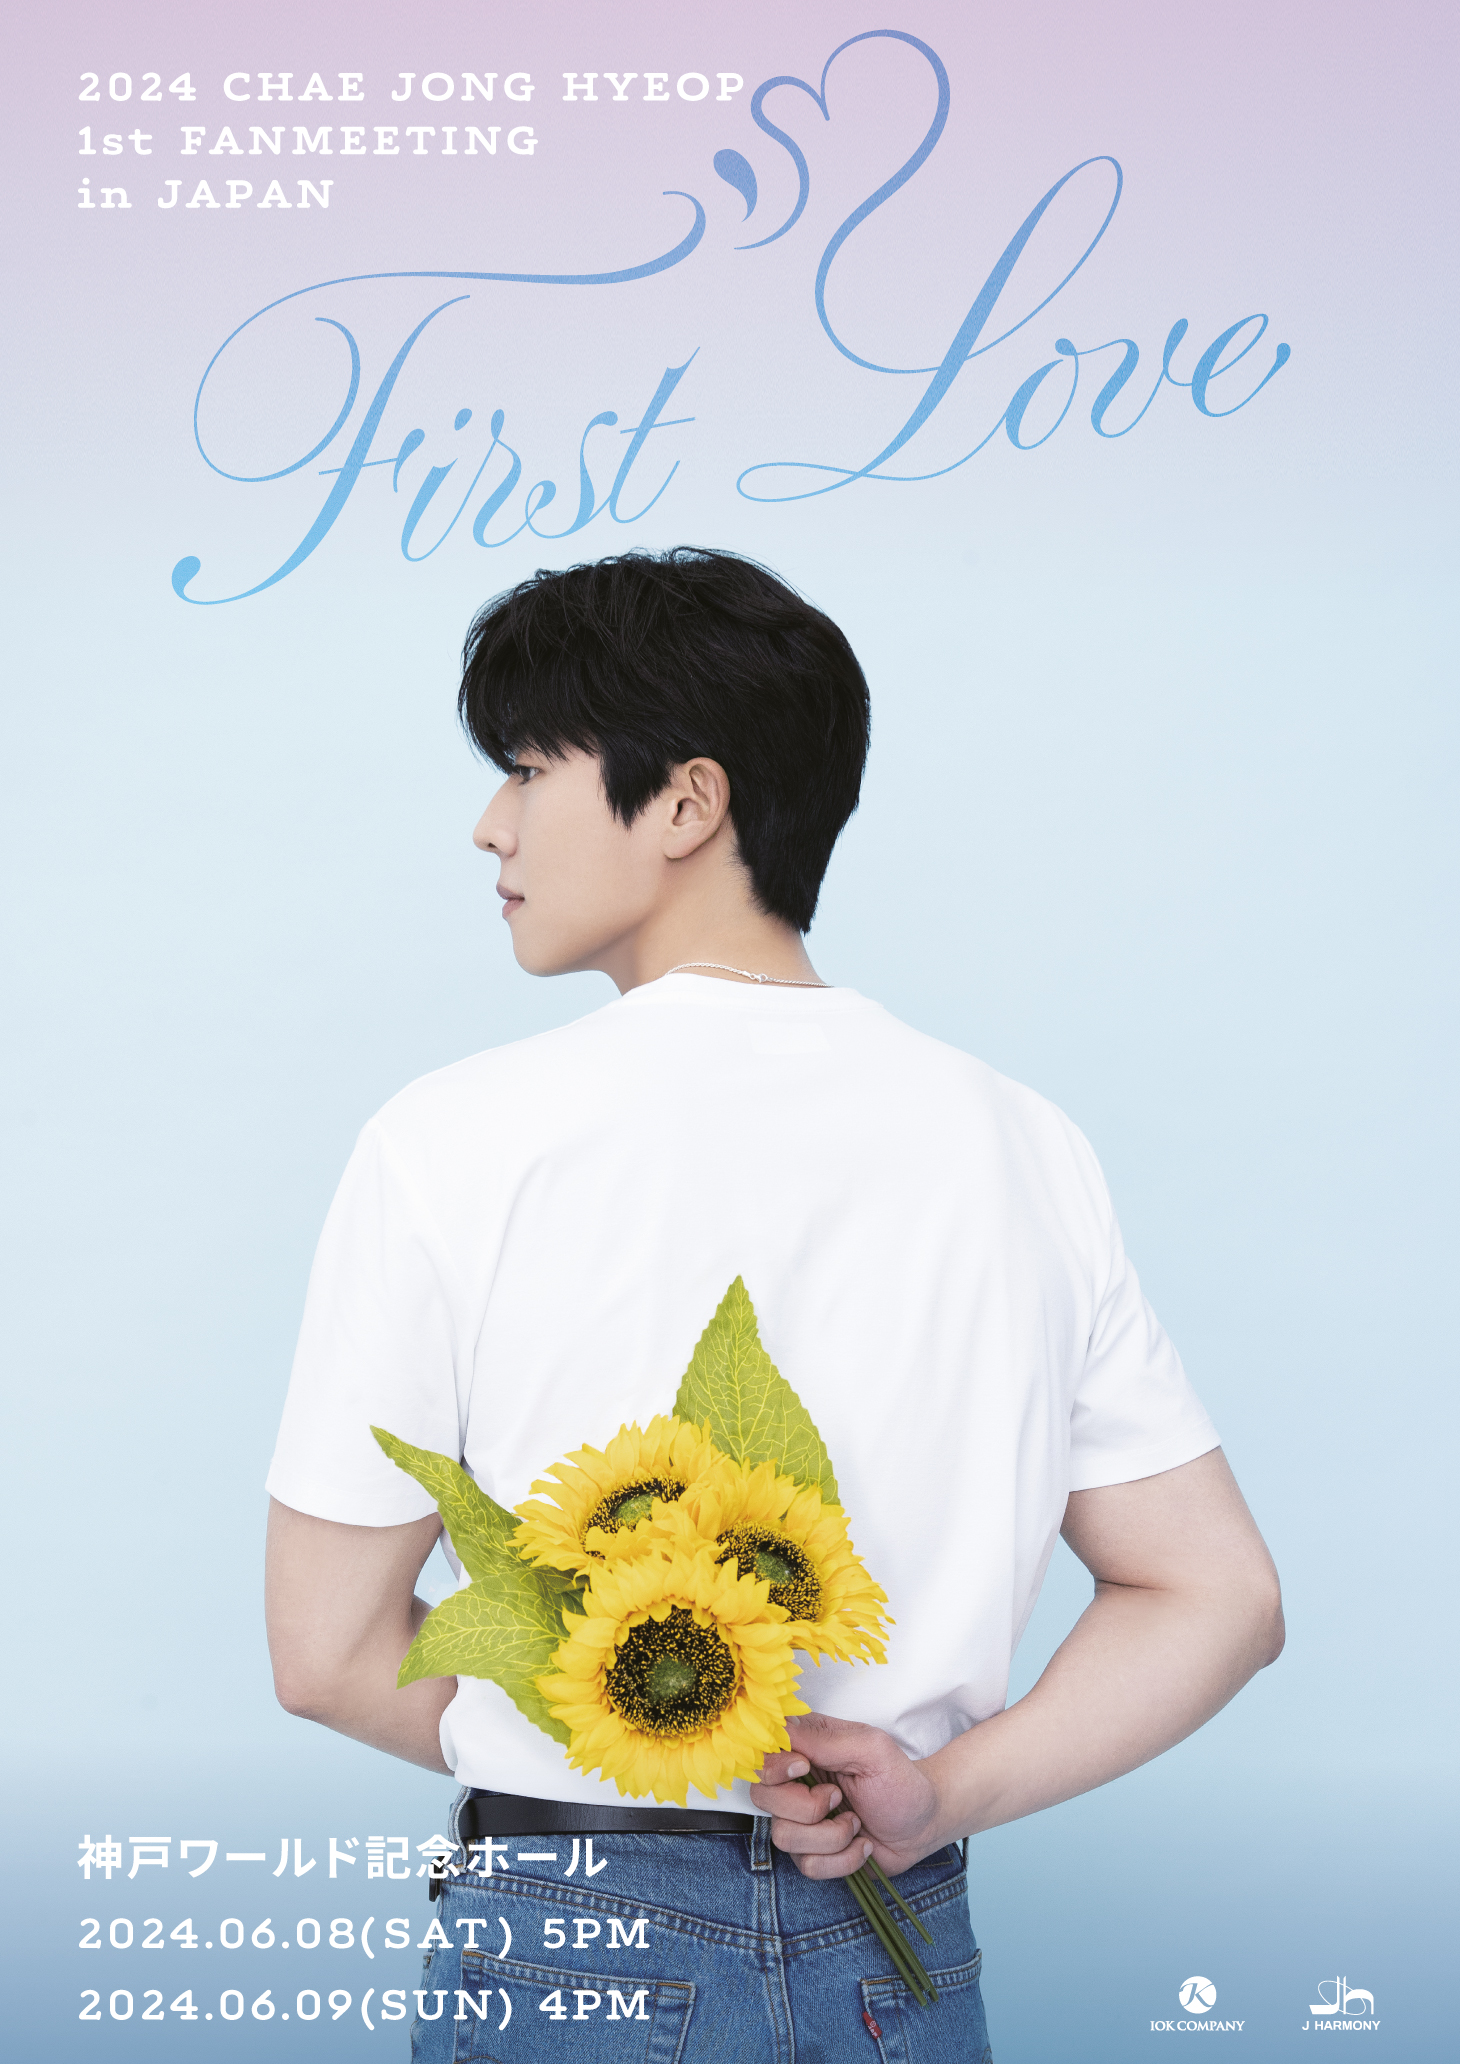 2024 CHAE JONG HYEOP 1st FANMEETING in JAPAN [First Love]追加公演開催決定！のサブ画像1